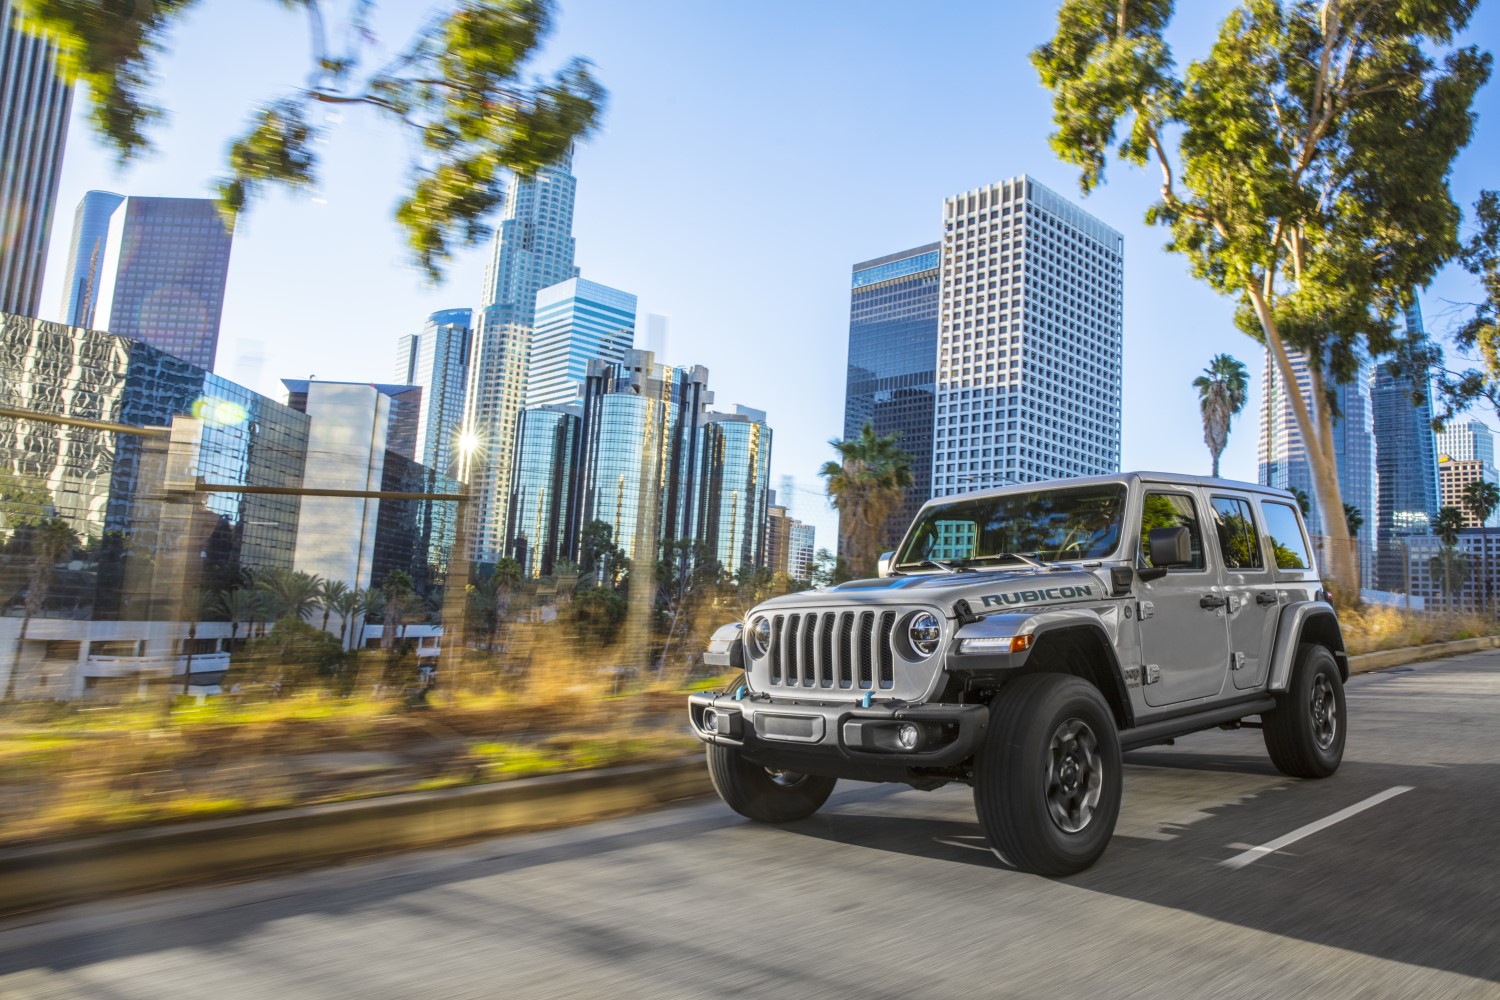  Lease a Jeep in Grove City, OH 